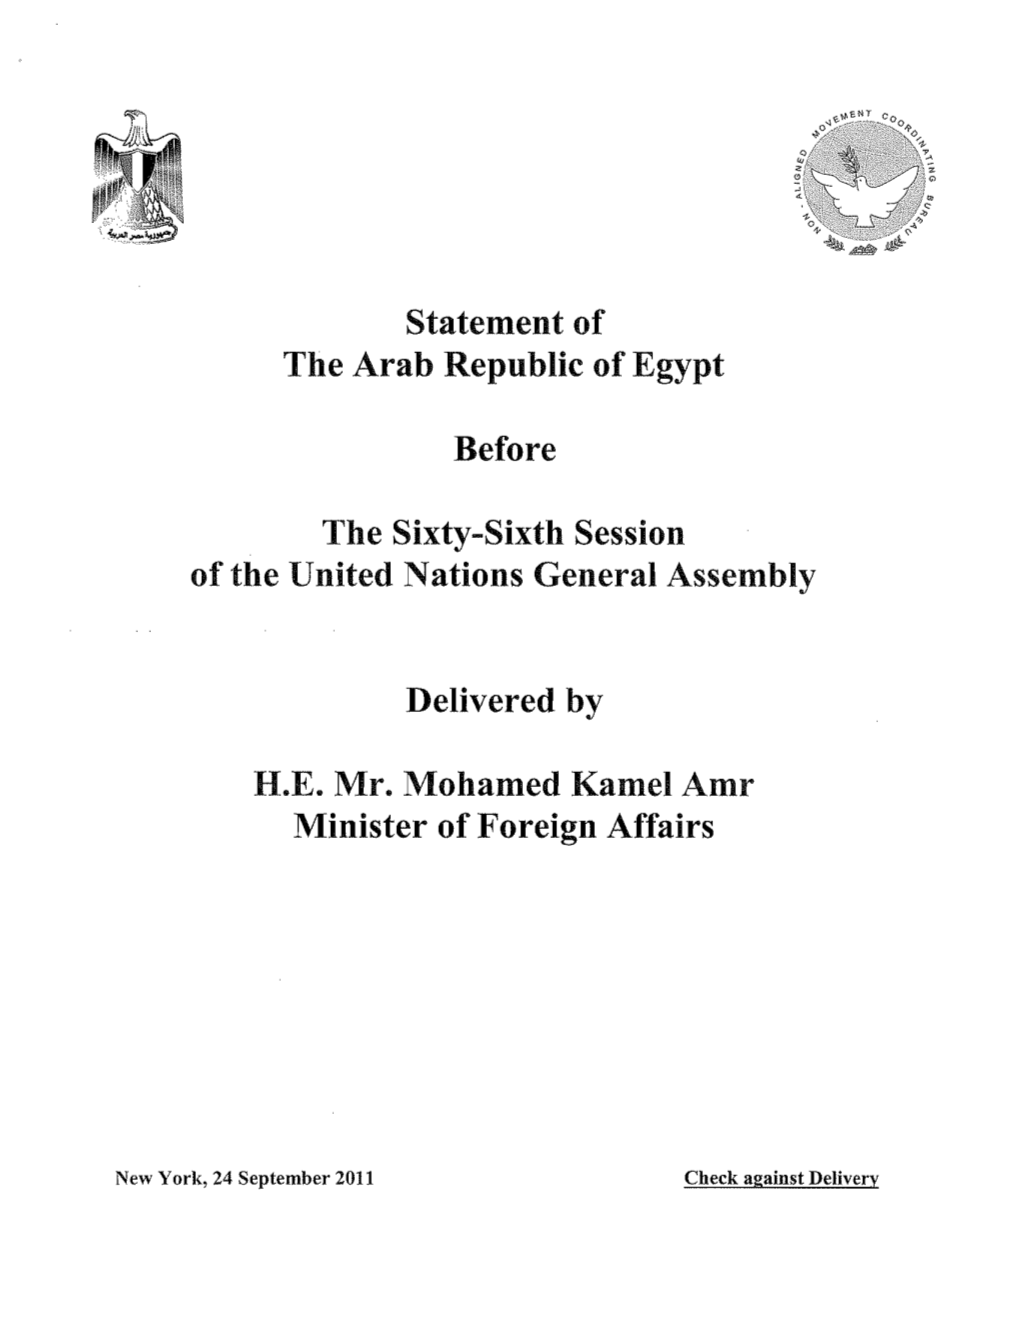 Statement of the Arab Republic of Egypt Before the Sixty-Sixth